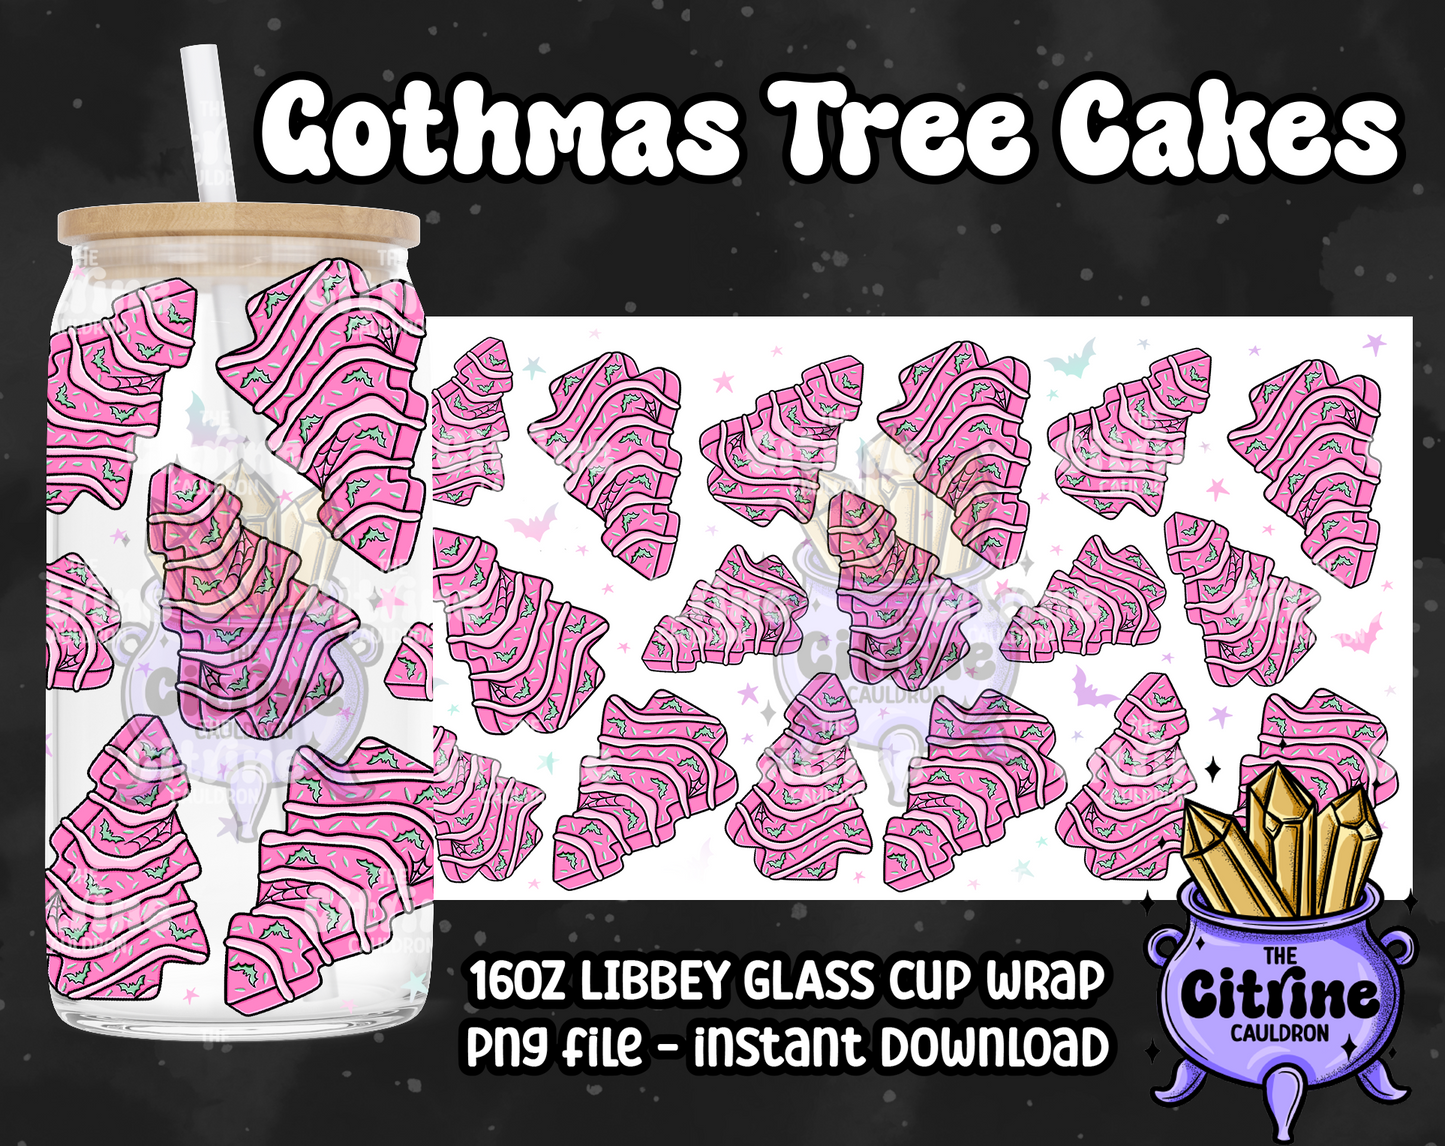 Gothmas Tree Cakes - PNG Wrap for Libbey 16oz Glass Can